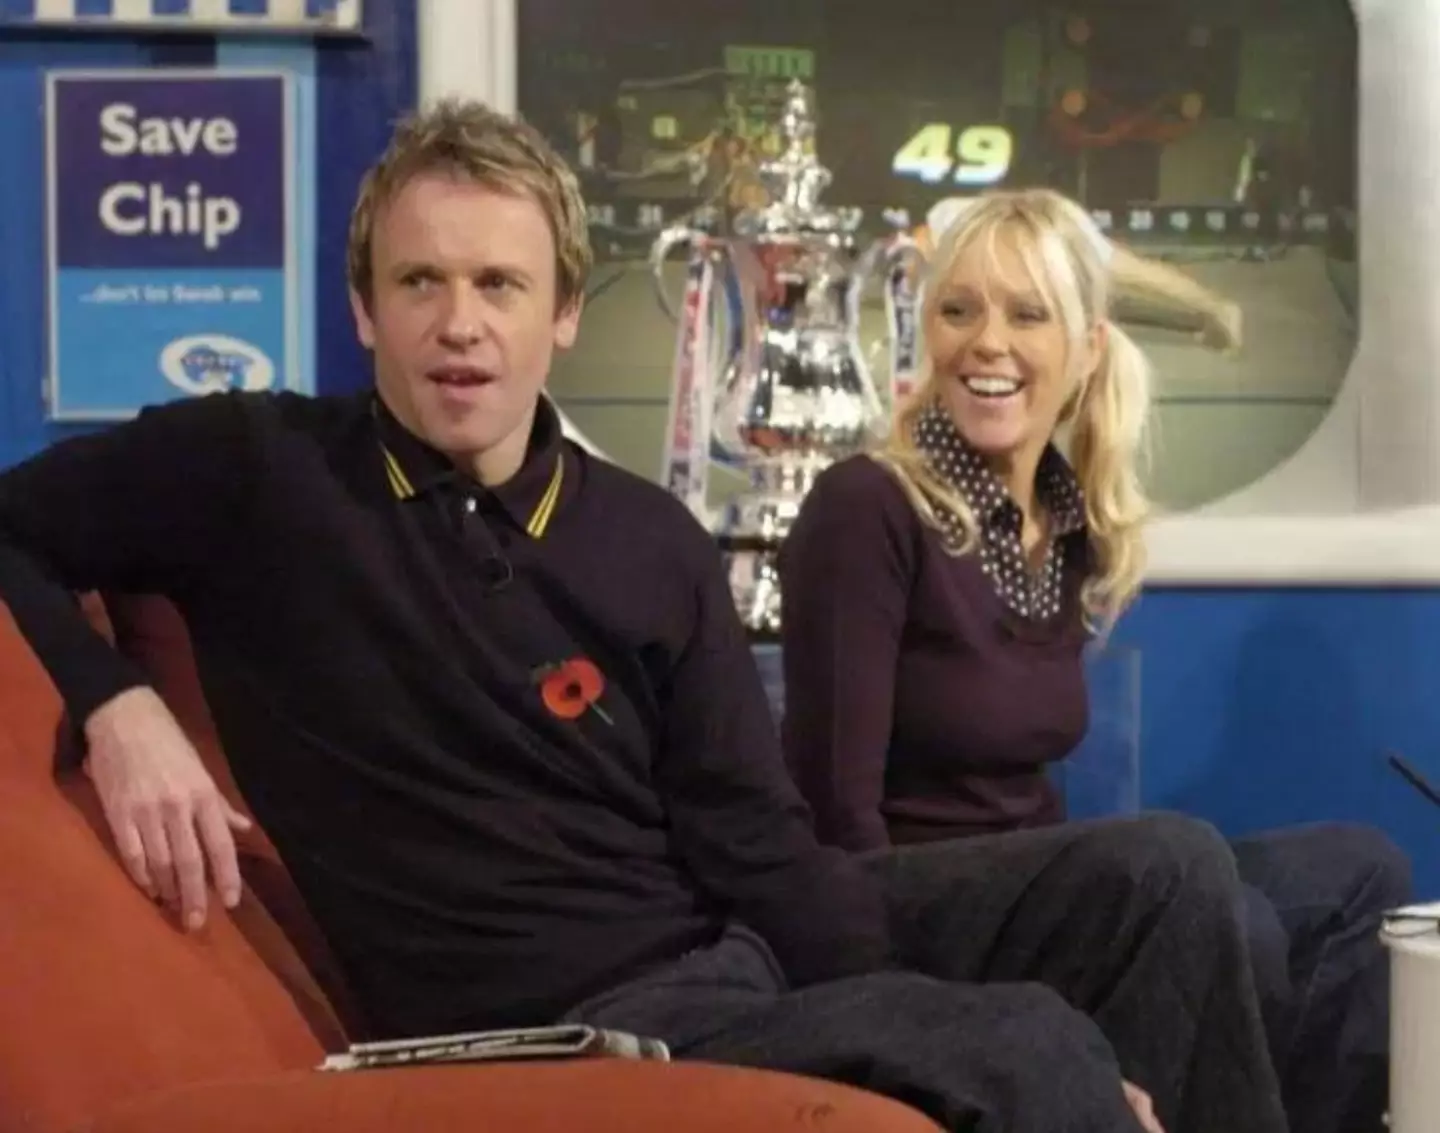 Tim Lovejoy and Helen Chamberlain were an iconic pairing.